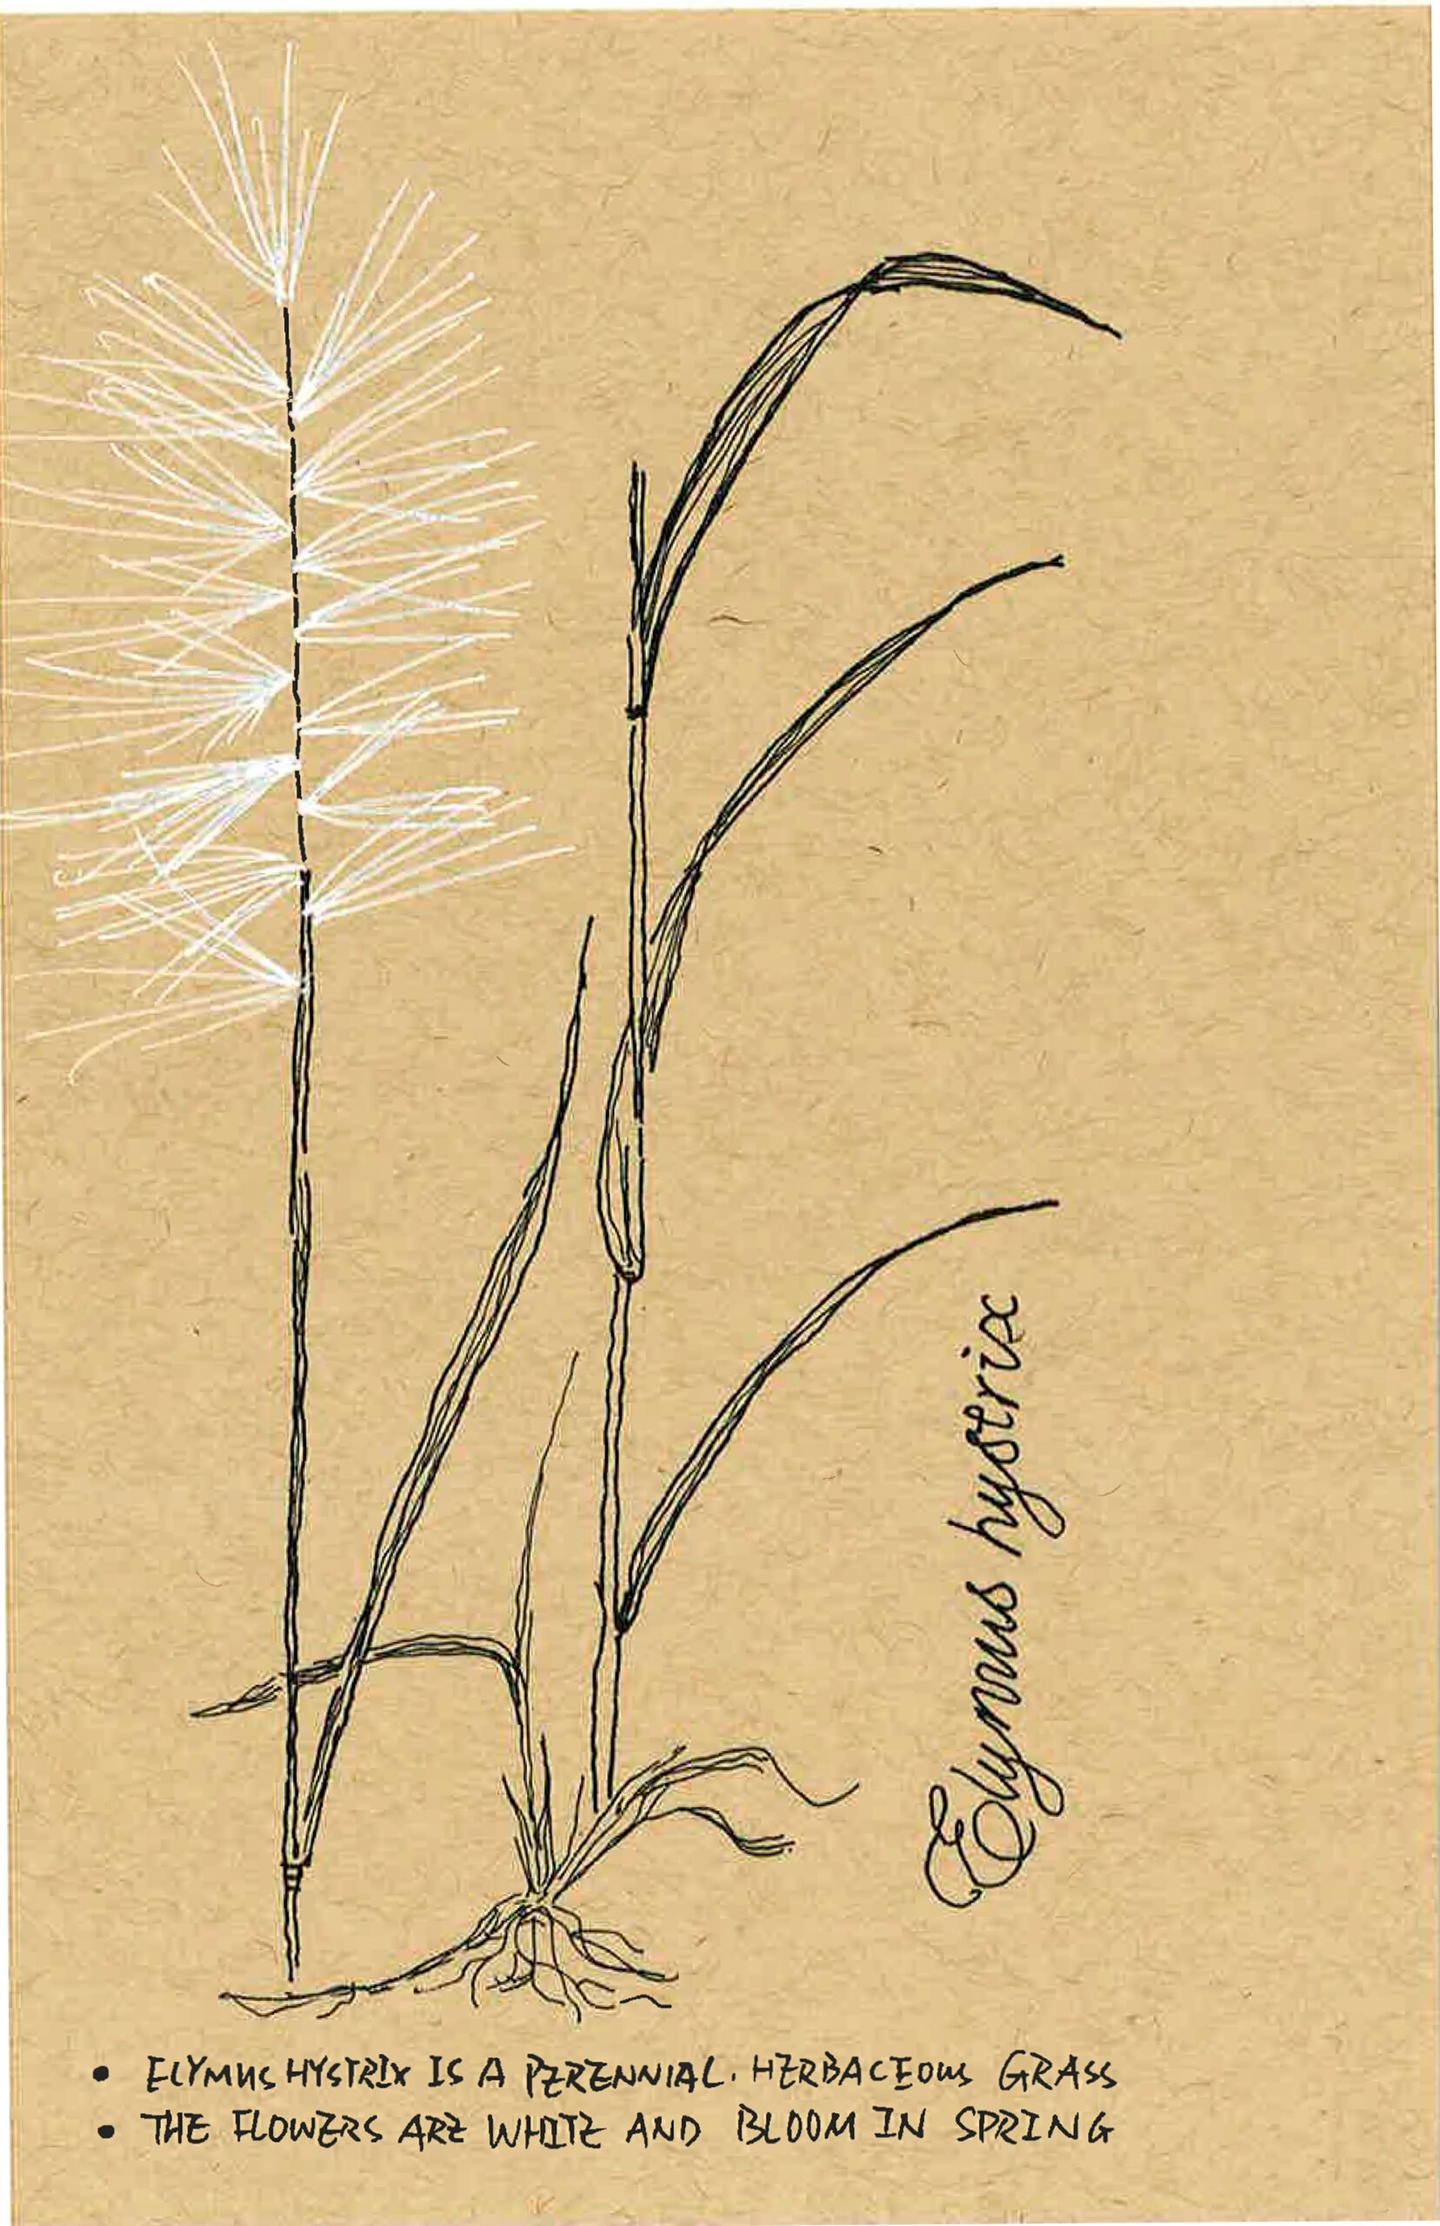 Drawing of a grass with bristly spikelets 